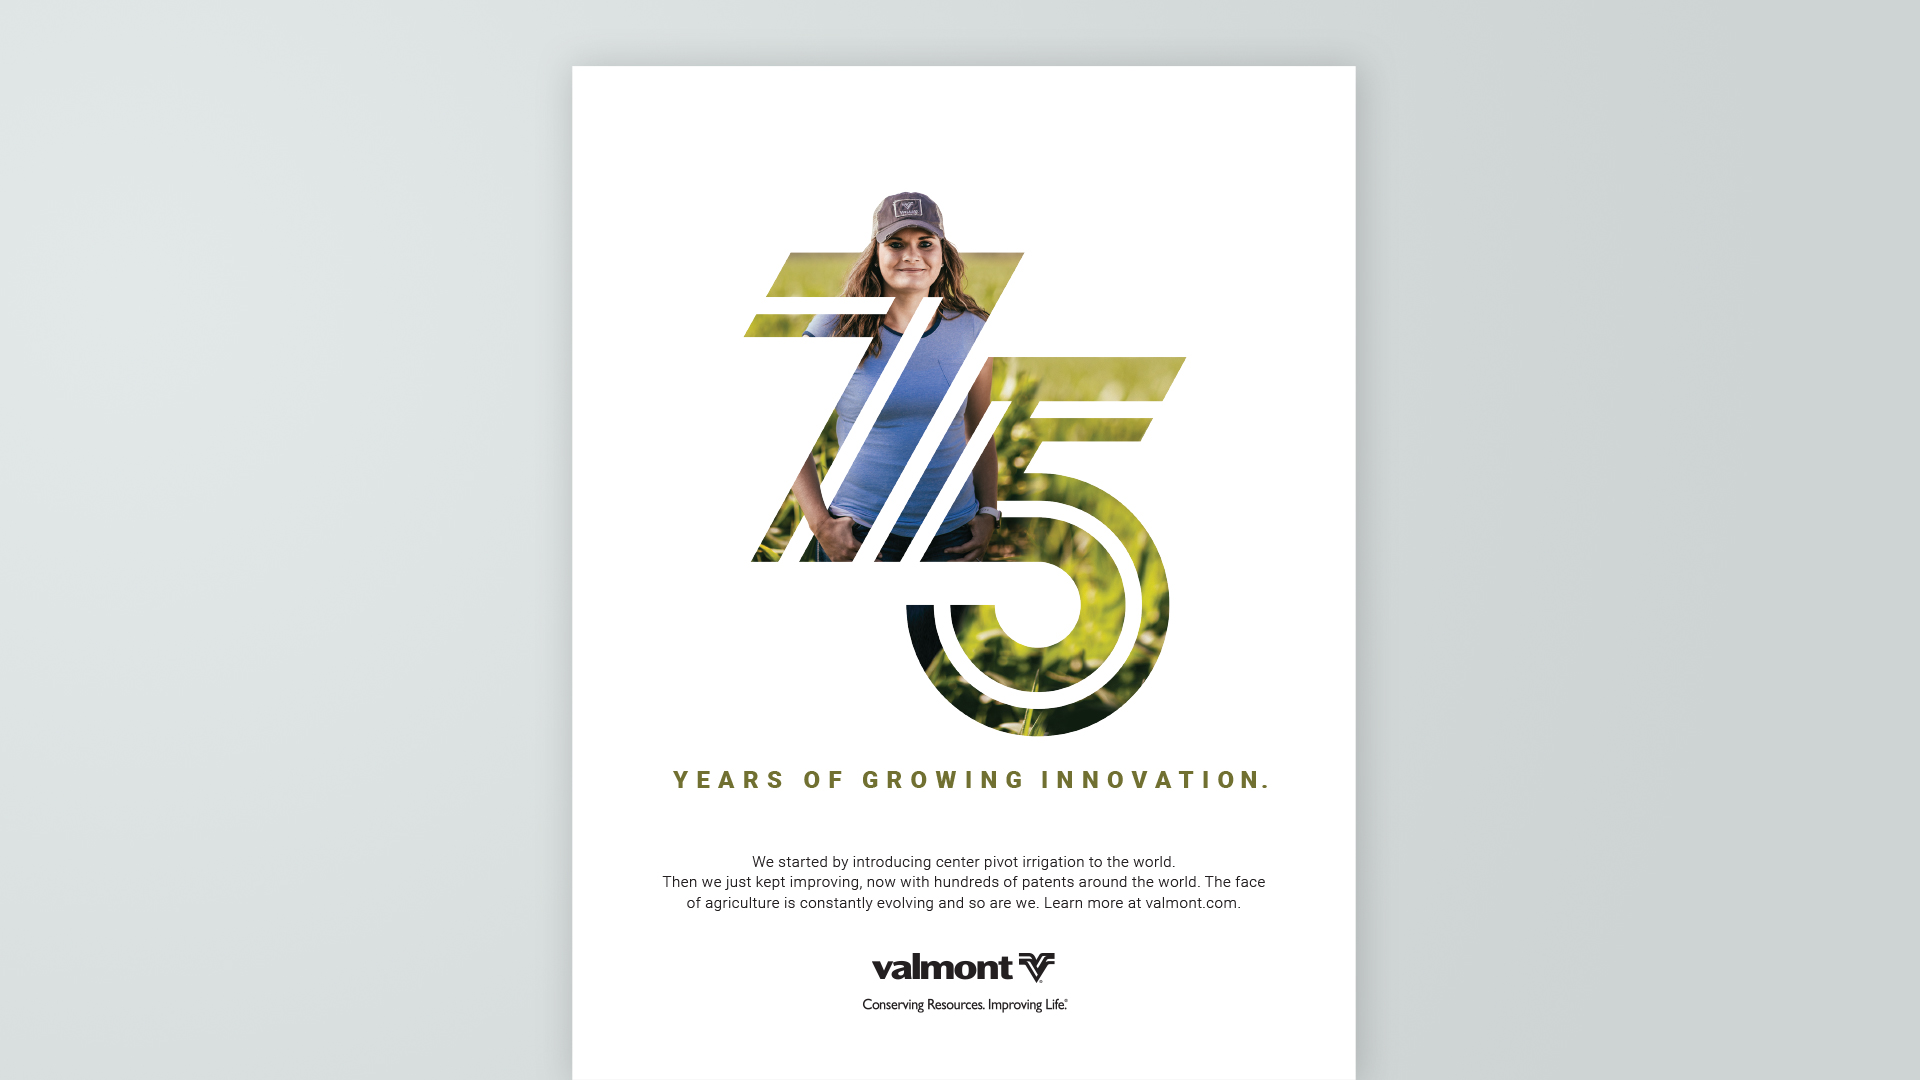 Valmont Anniversary Campaign Omaha: Ad Layout